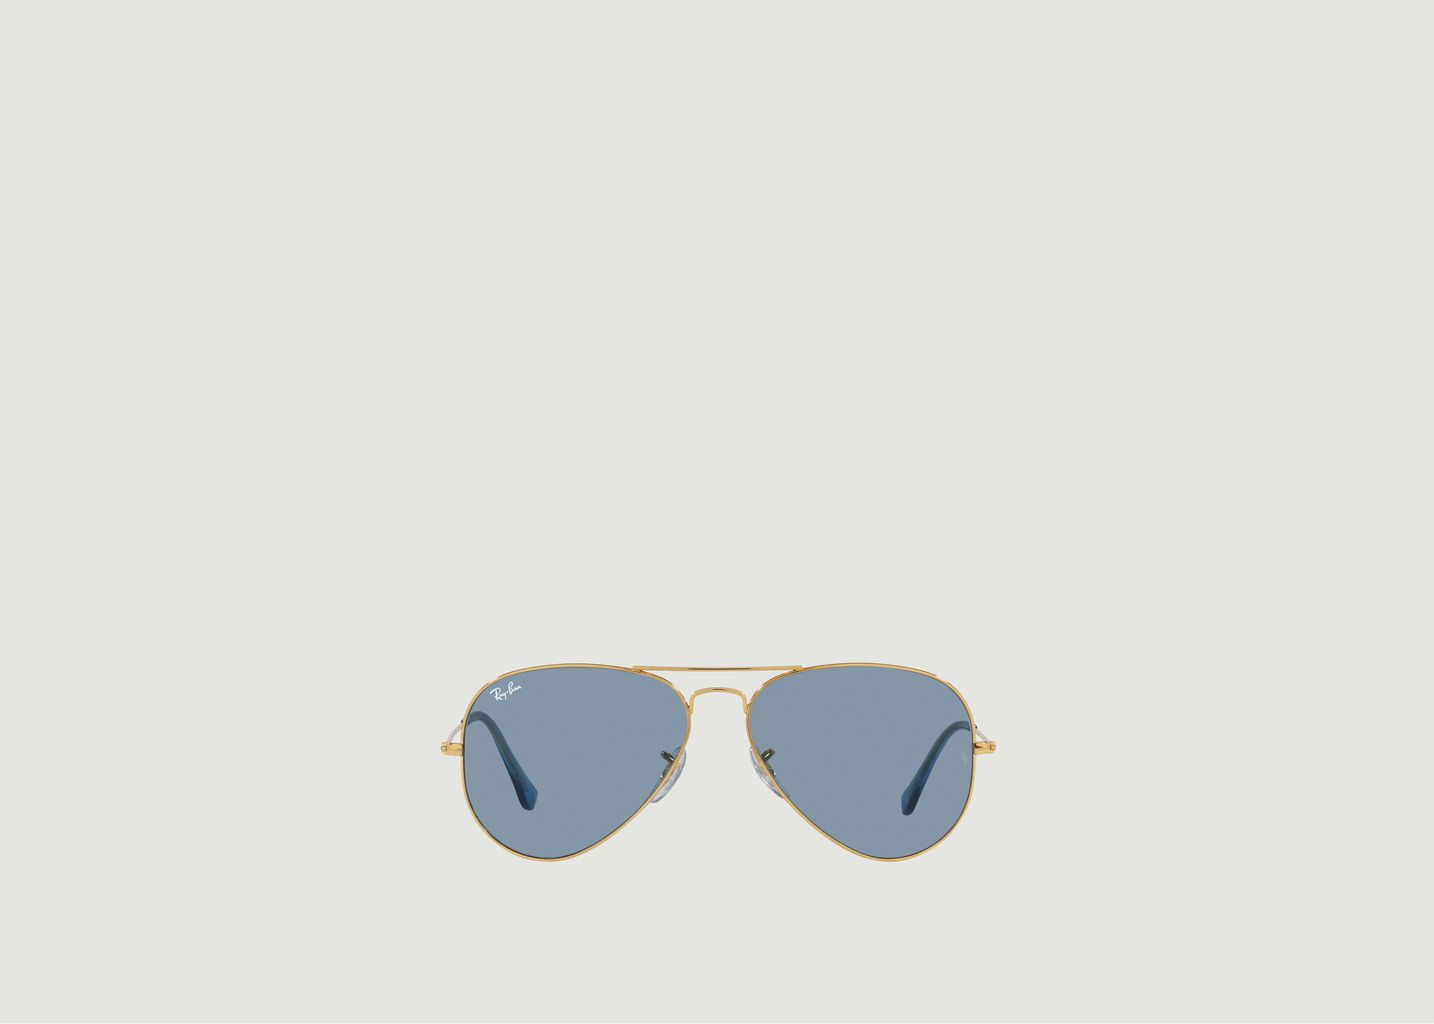 Glasses by Soliel Aviator True Blue - Ray-Ban